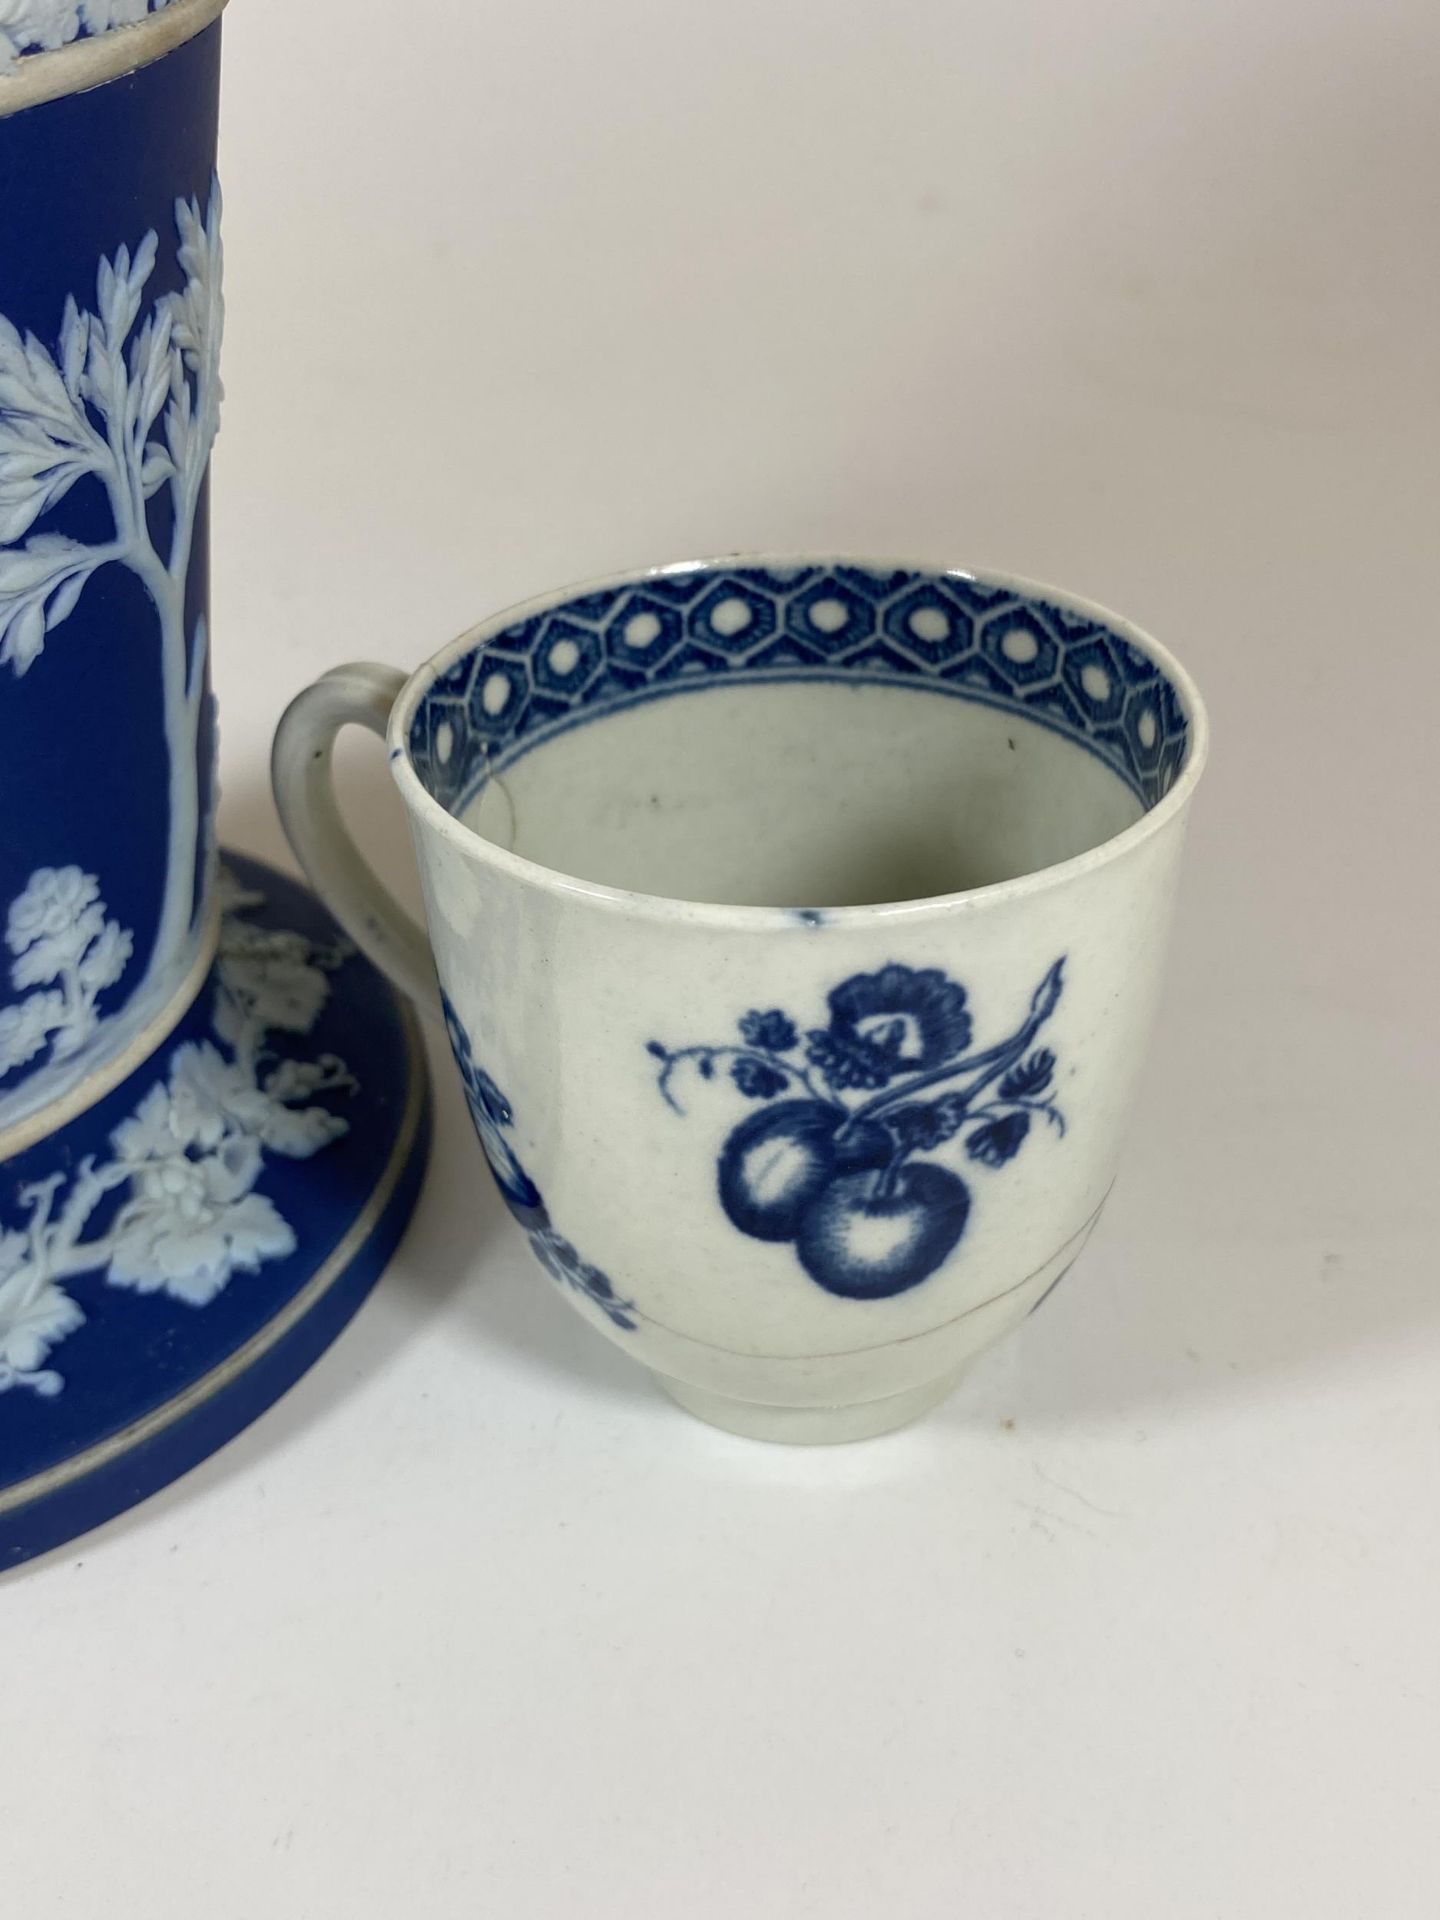 TWO ITEMS - A 19TH CENTURY WEDGWOOD JASPERWARE DIP VASE AND 18TH CENTURY WORCESTER BLUE AND WHITE - Image 3 of 5